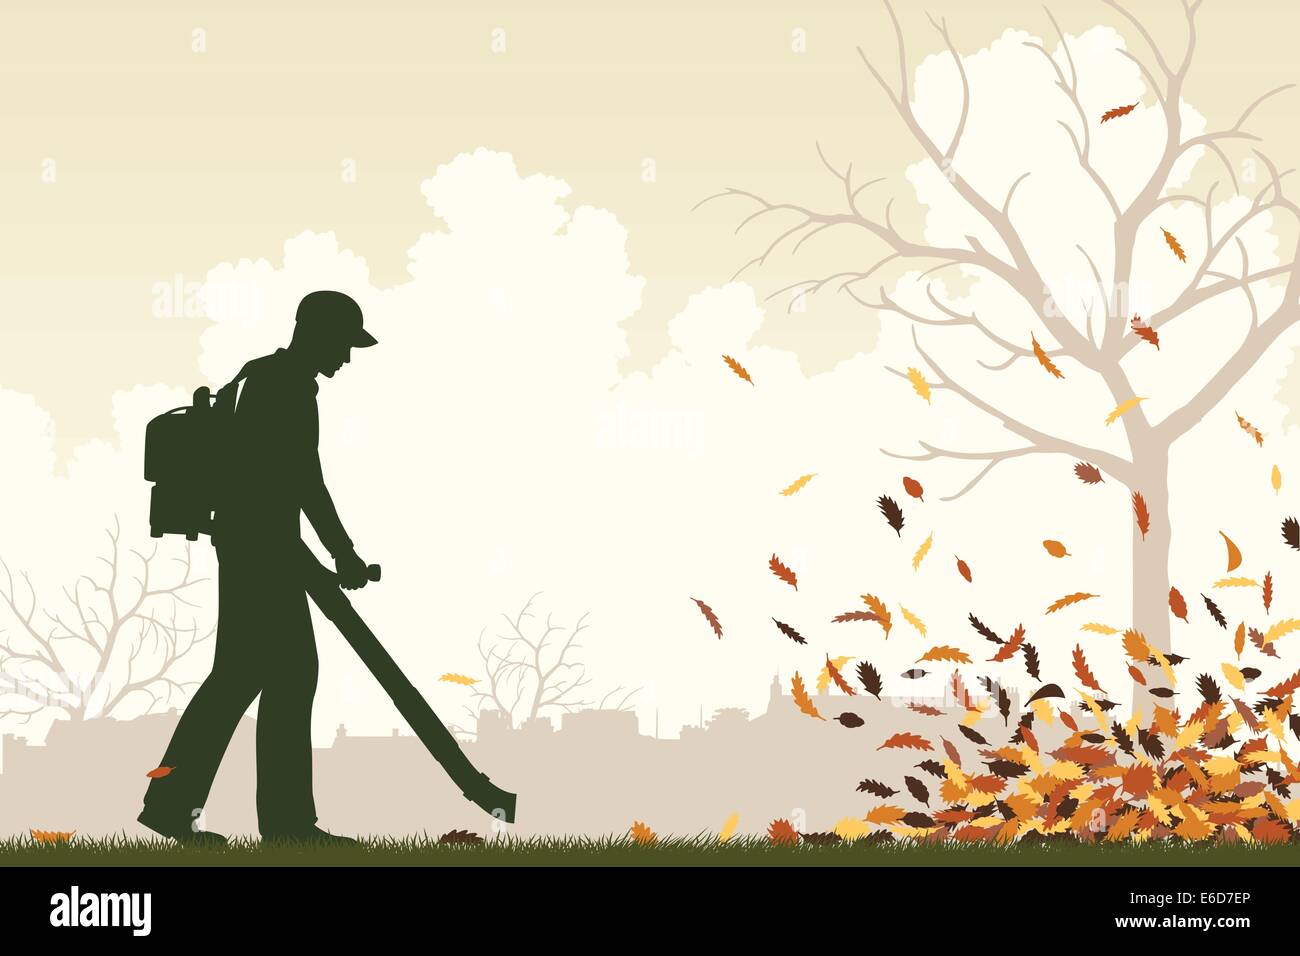 Editable vector illustration of a man using a leaf-blower to clear leaves Stock Vector